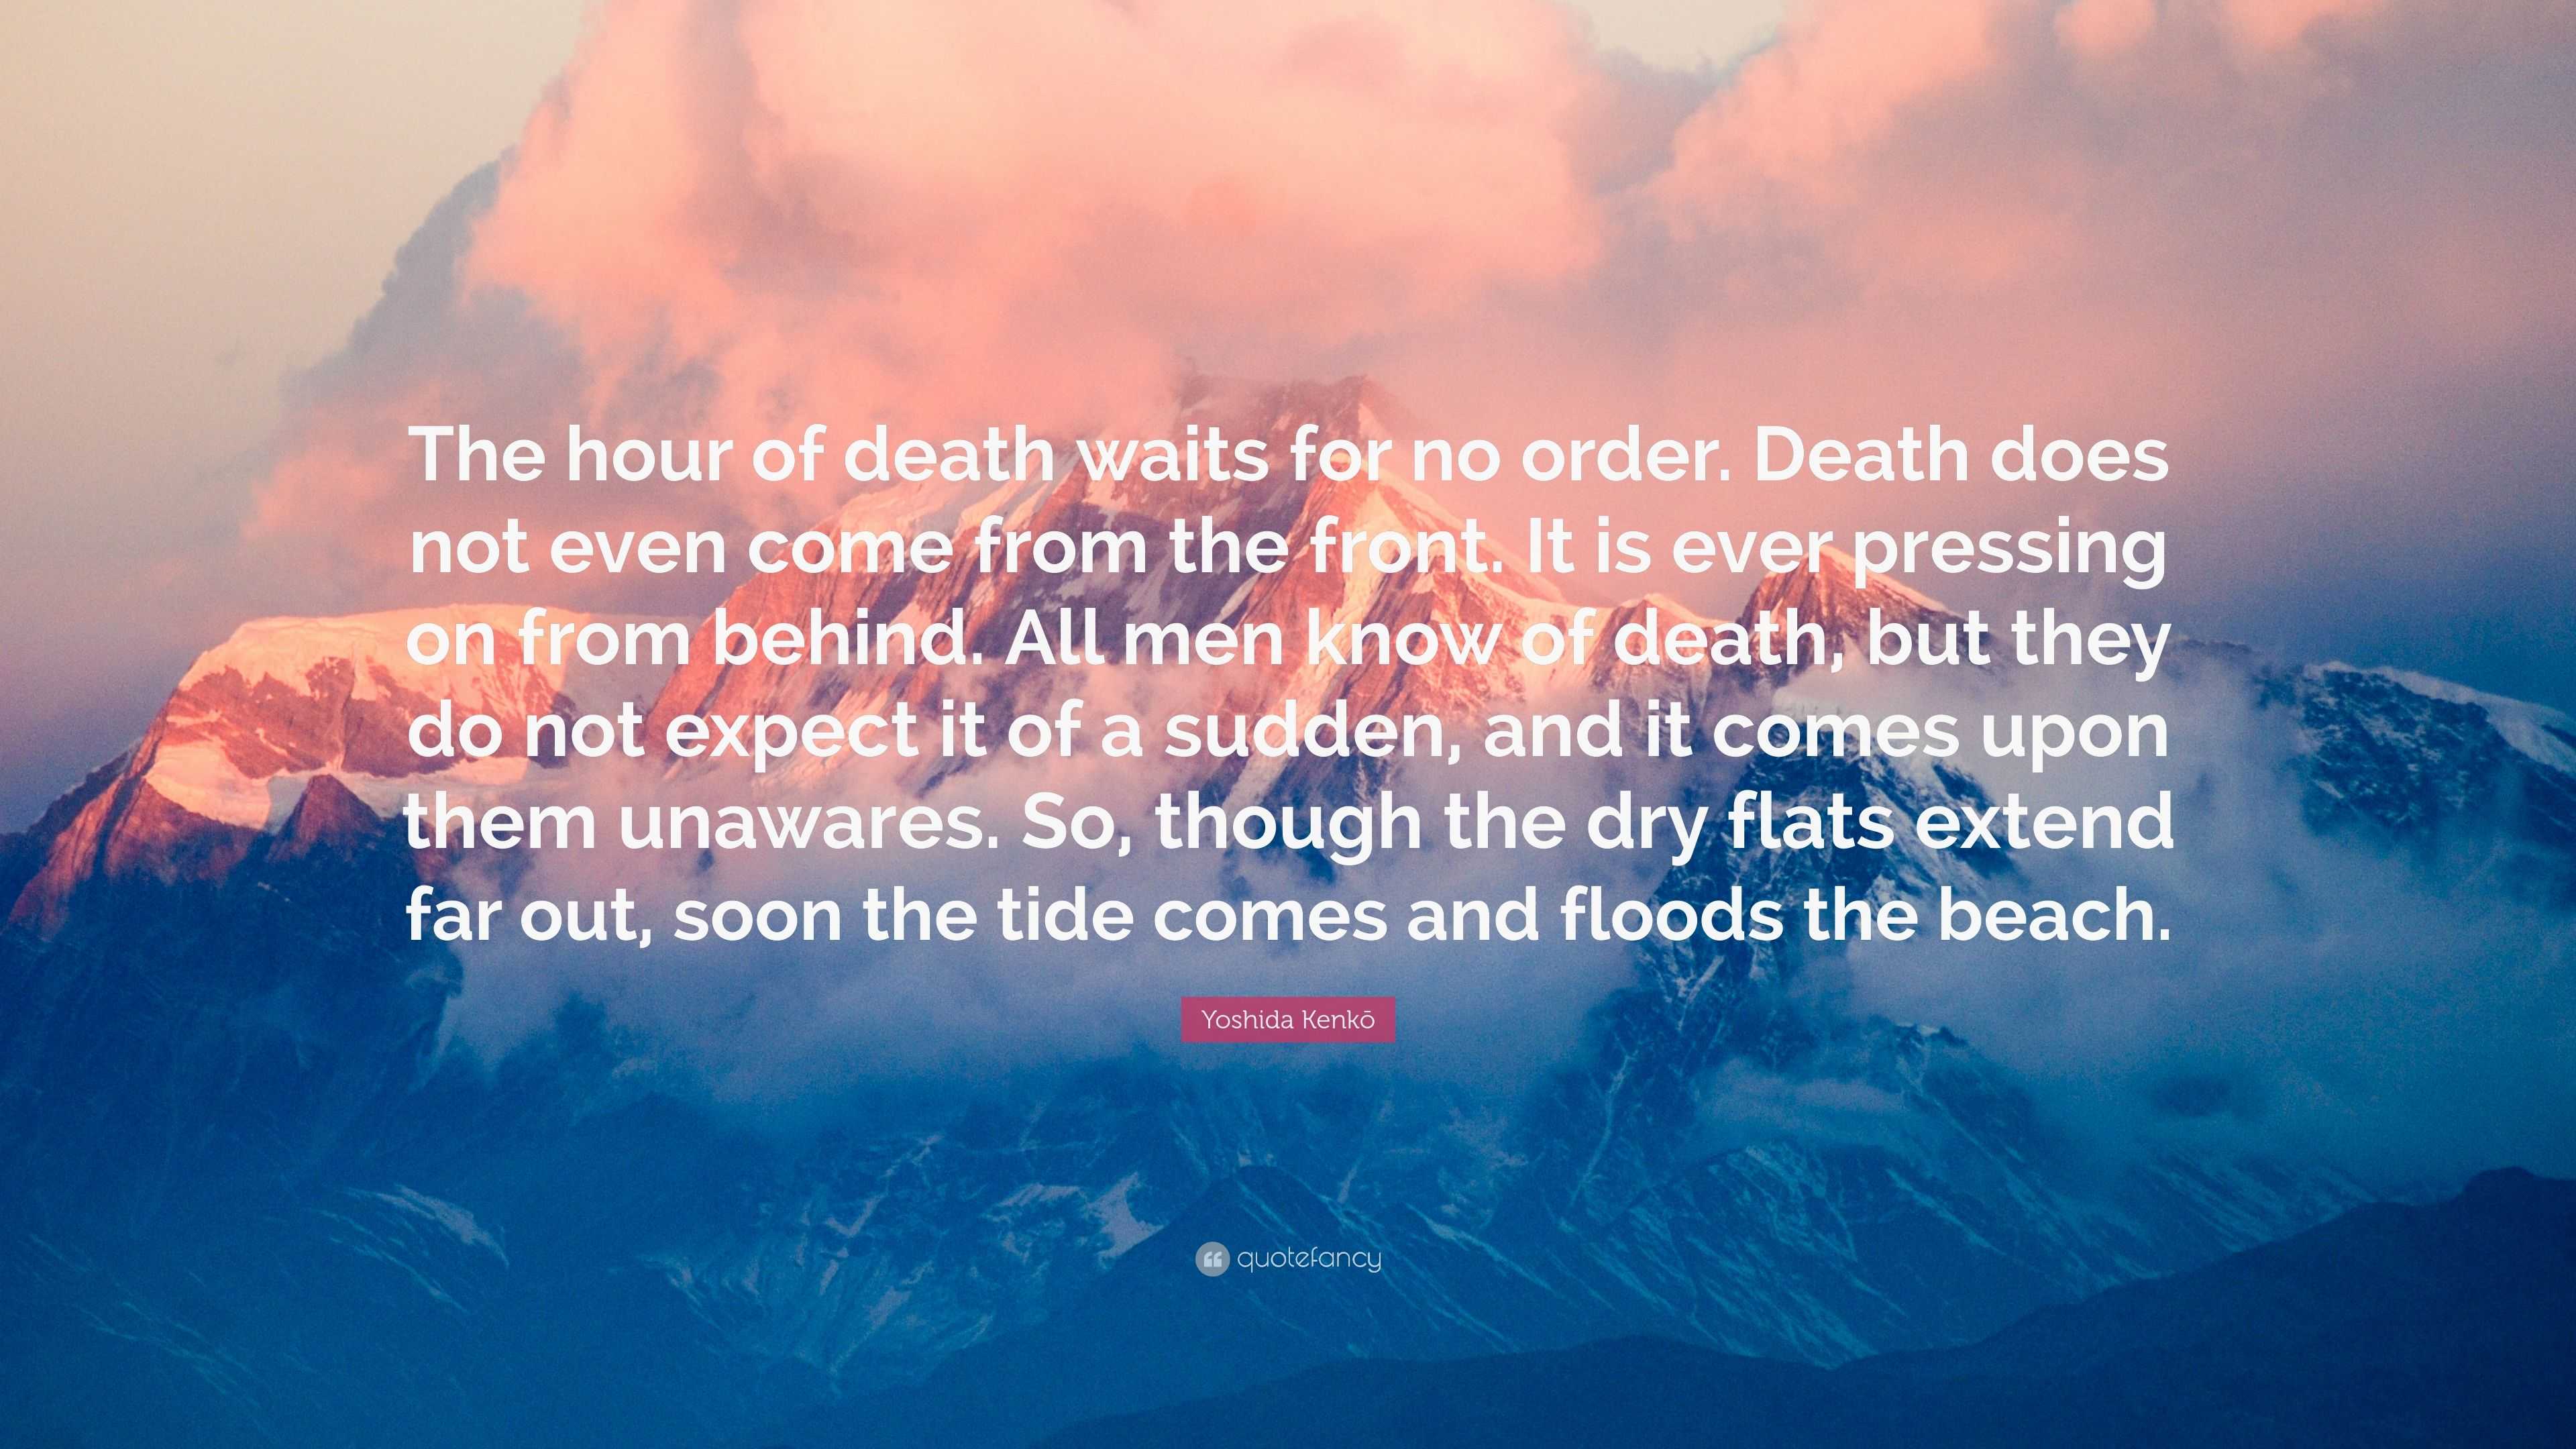 Yoshida Kenkō Quote: “The hour of death waits for no order. Death does ...